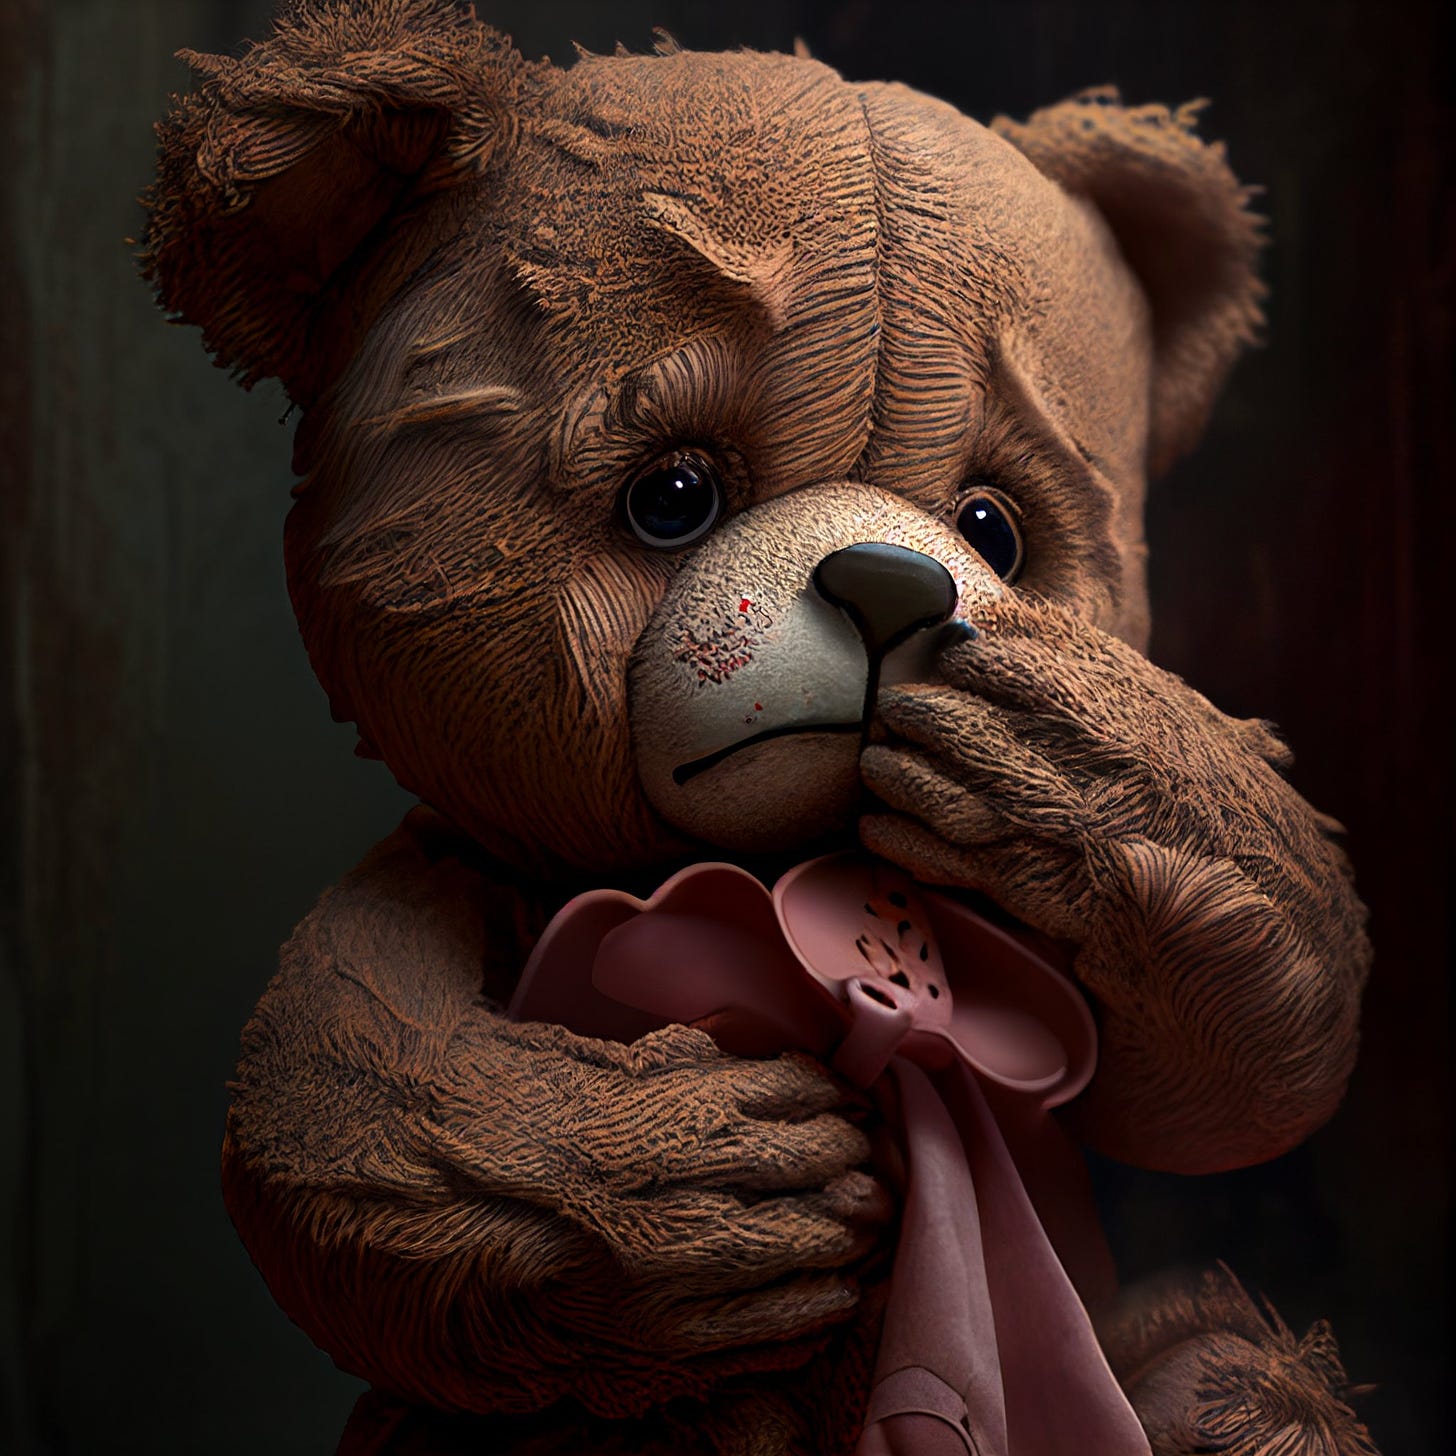 Tearful, frightened, muffled, innocent, distraught, facemask, comfort, quiver, hesitantly, sorrowfully, teddy bear.